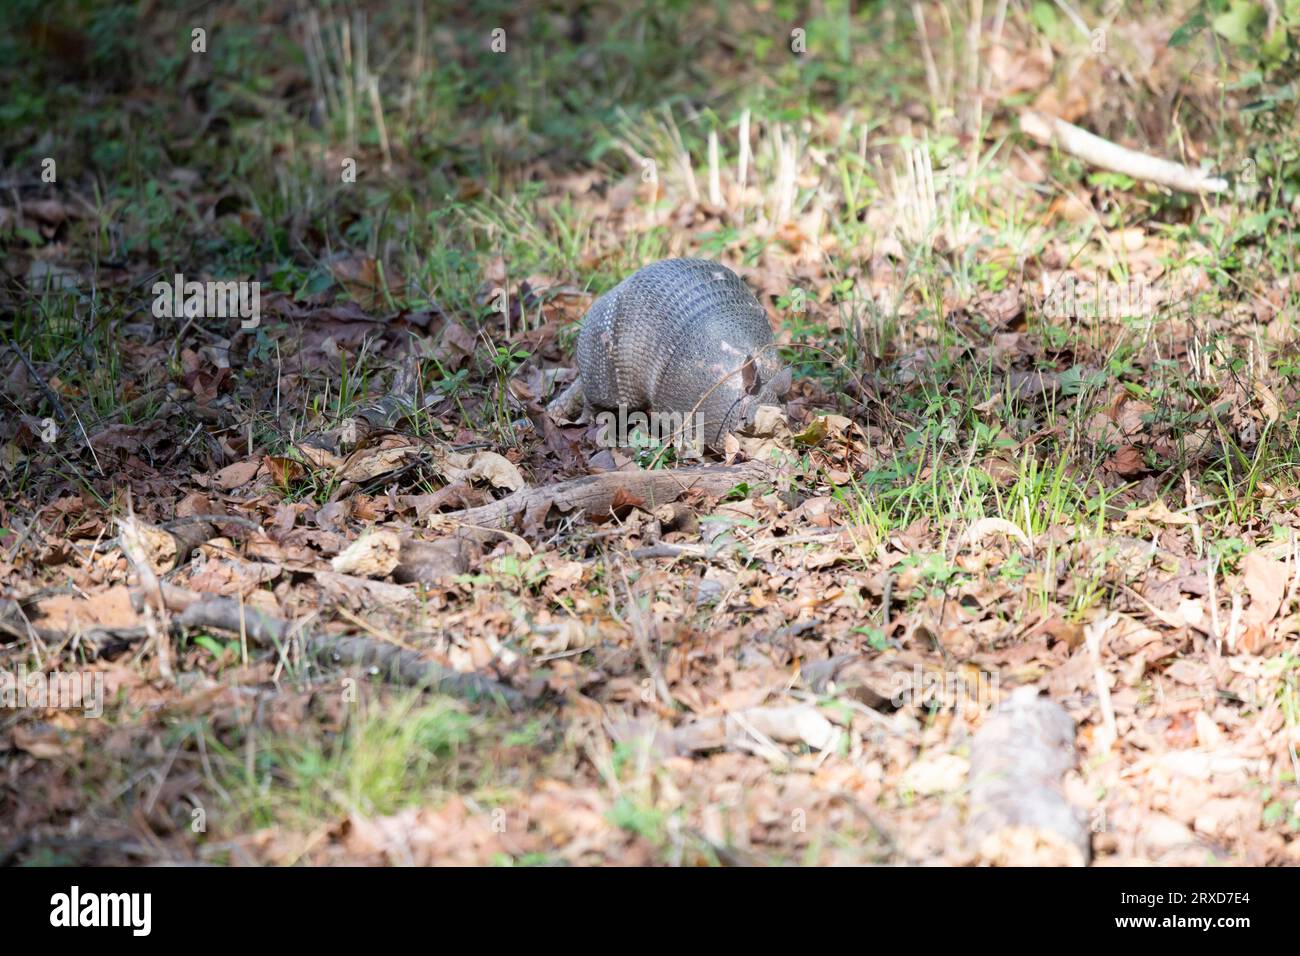 Nine-banded armadillo (Dasypus novemcinctus) with a damaged shell foraging in leaf litter Stock Photo